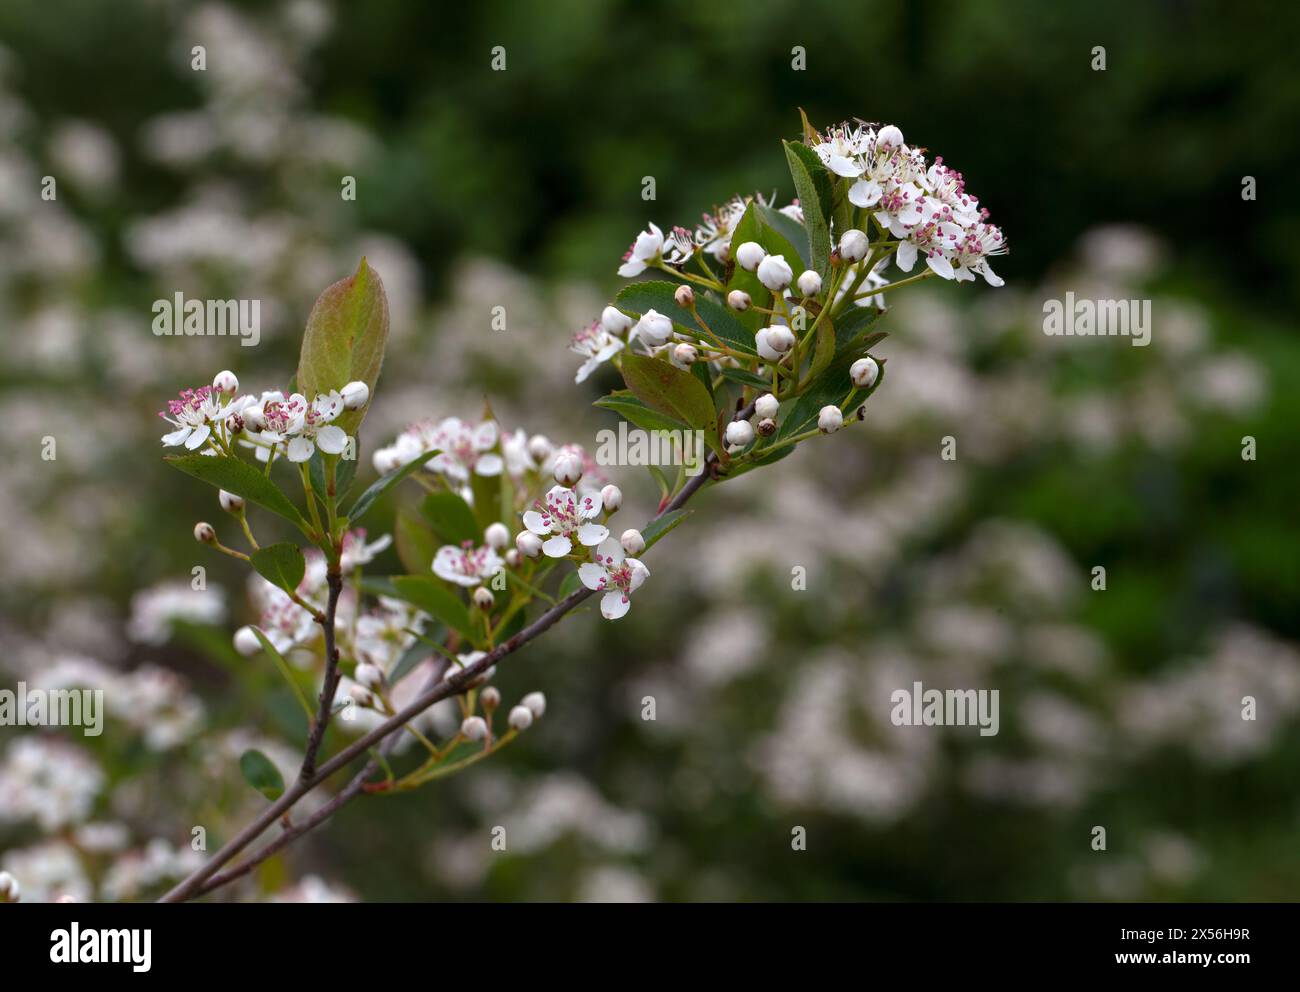 Closeup of flowers of Aronia melanocarpa 'Hugin' in a garden in early summer Stock Photo